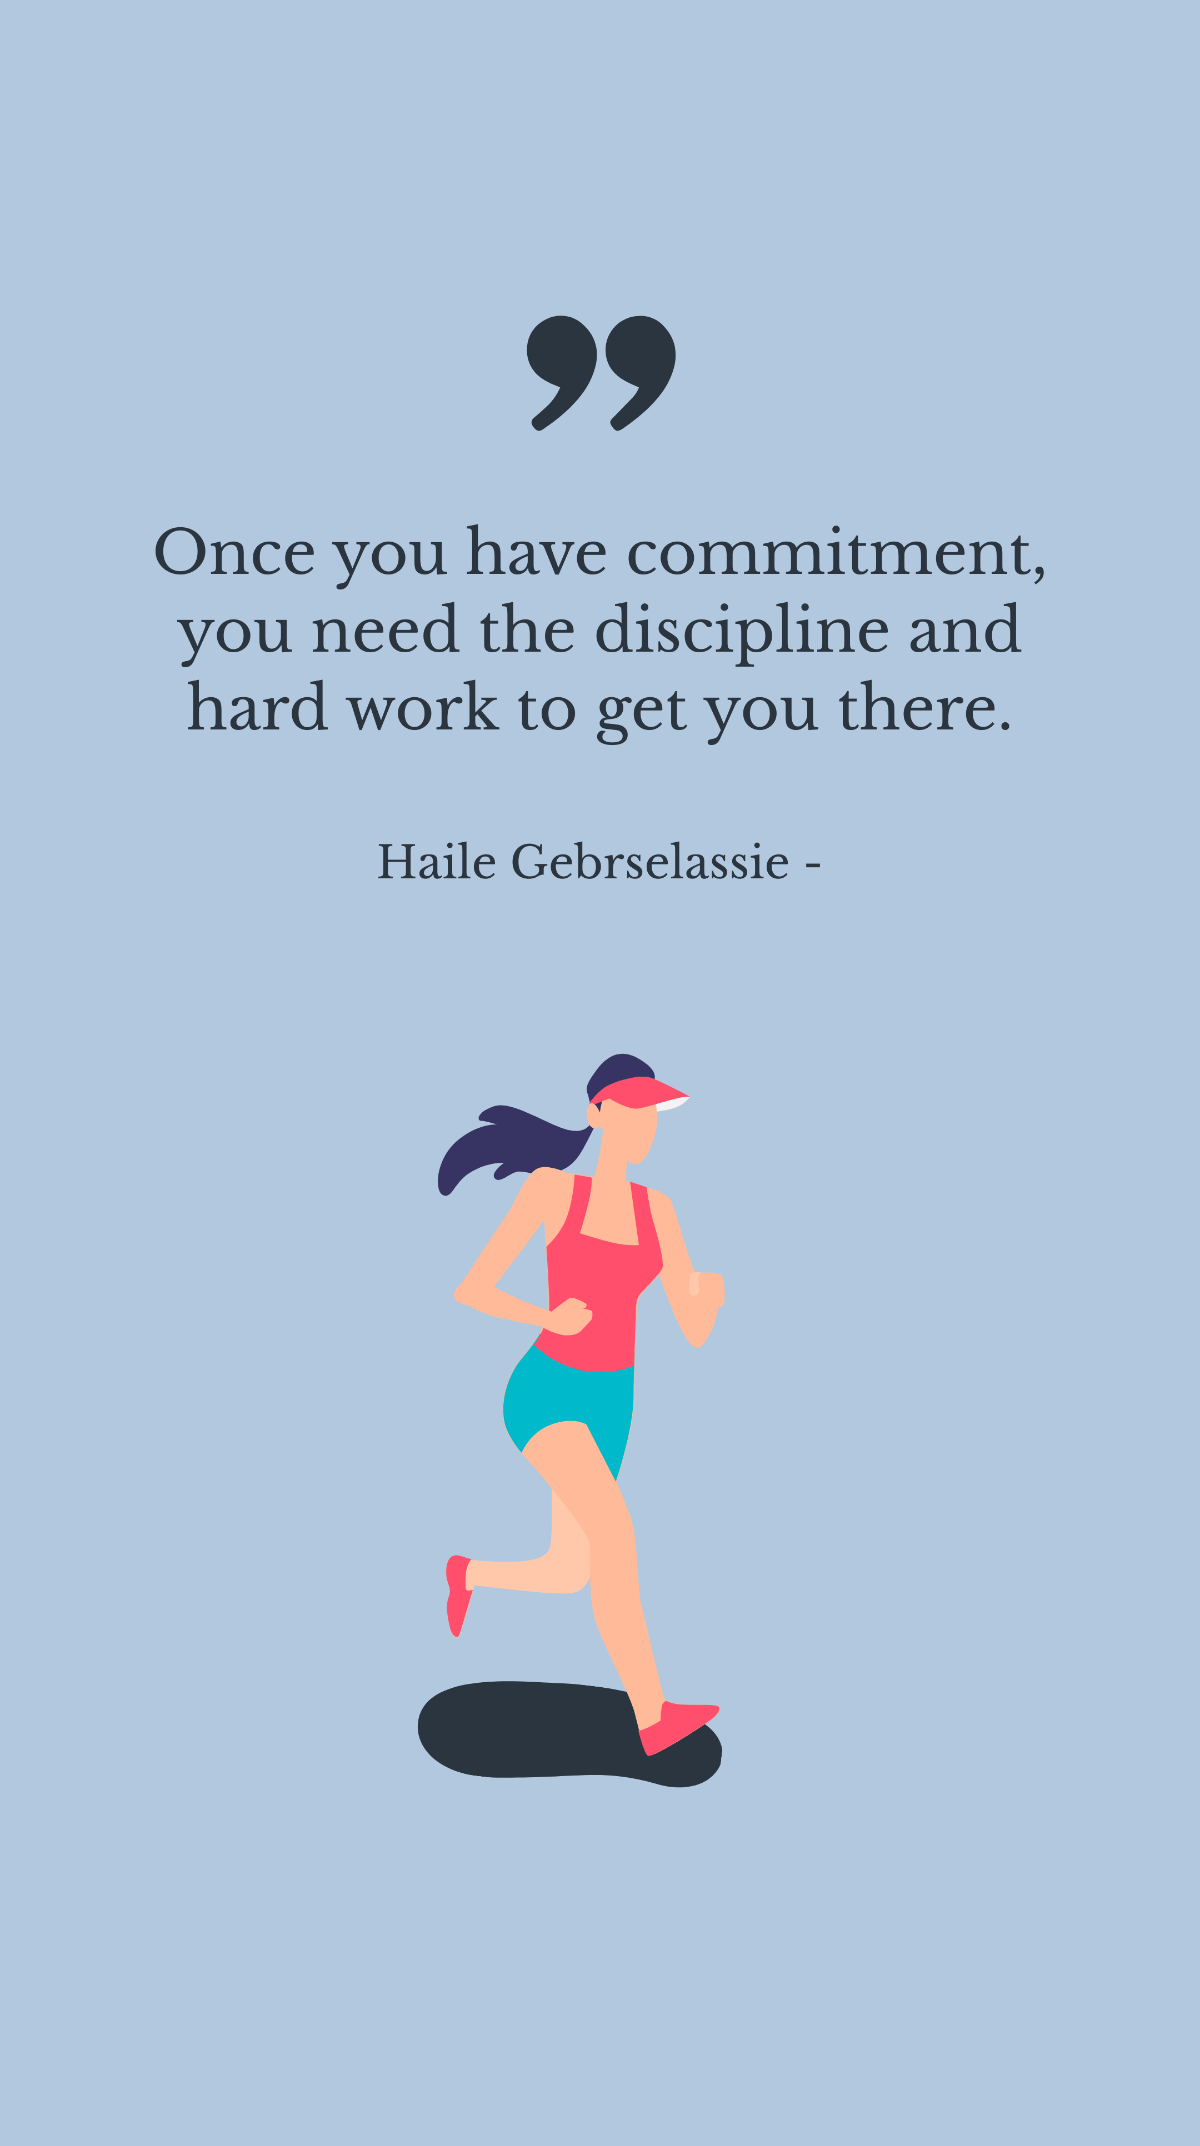 Haile Gebrselassie - Once you have commitment, you need the discipline and hard work to get you there. Template